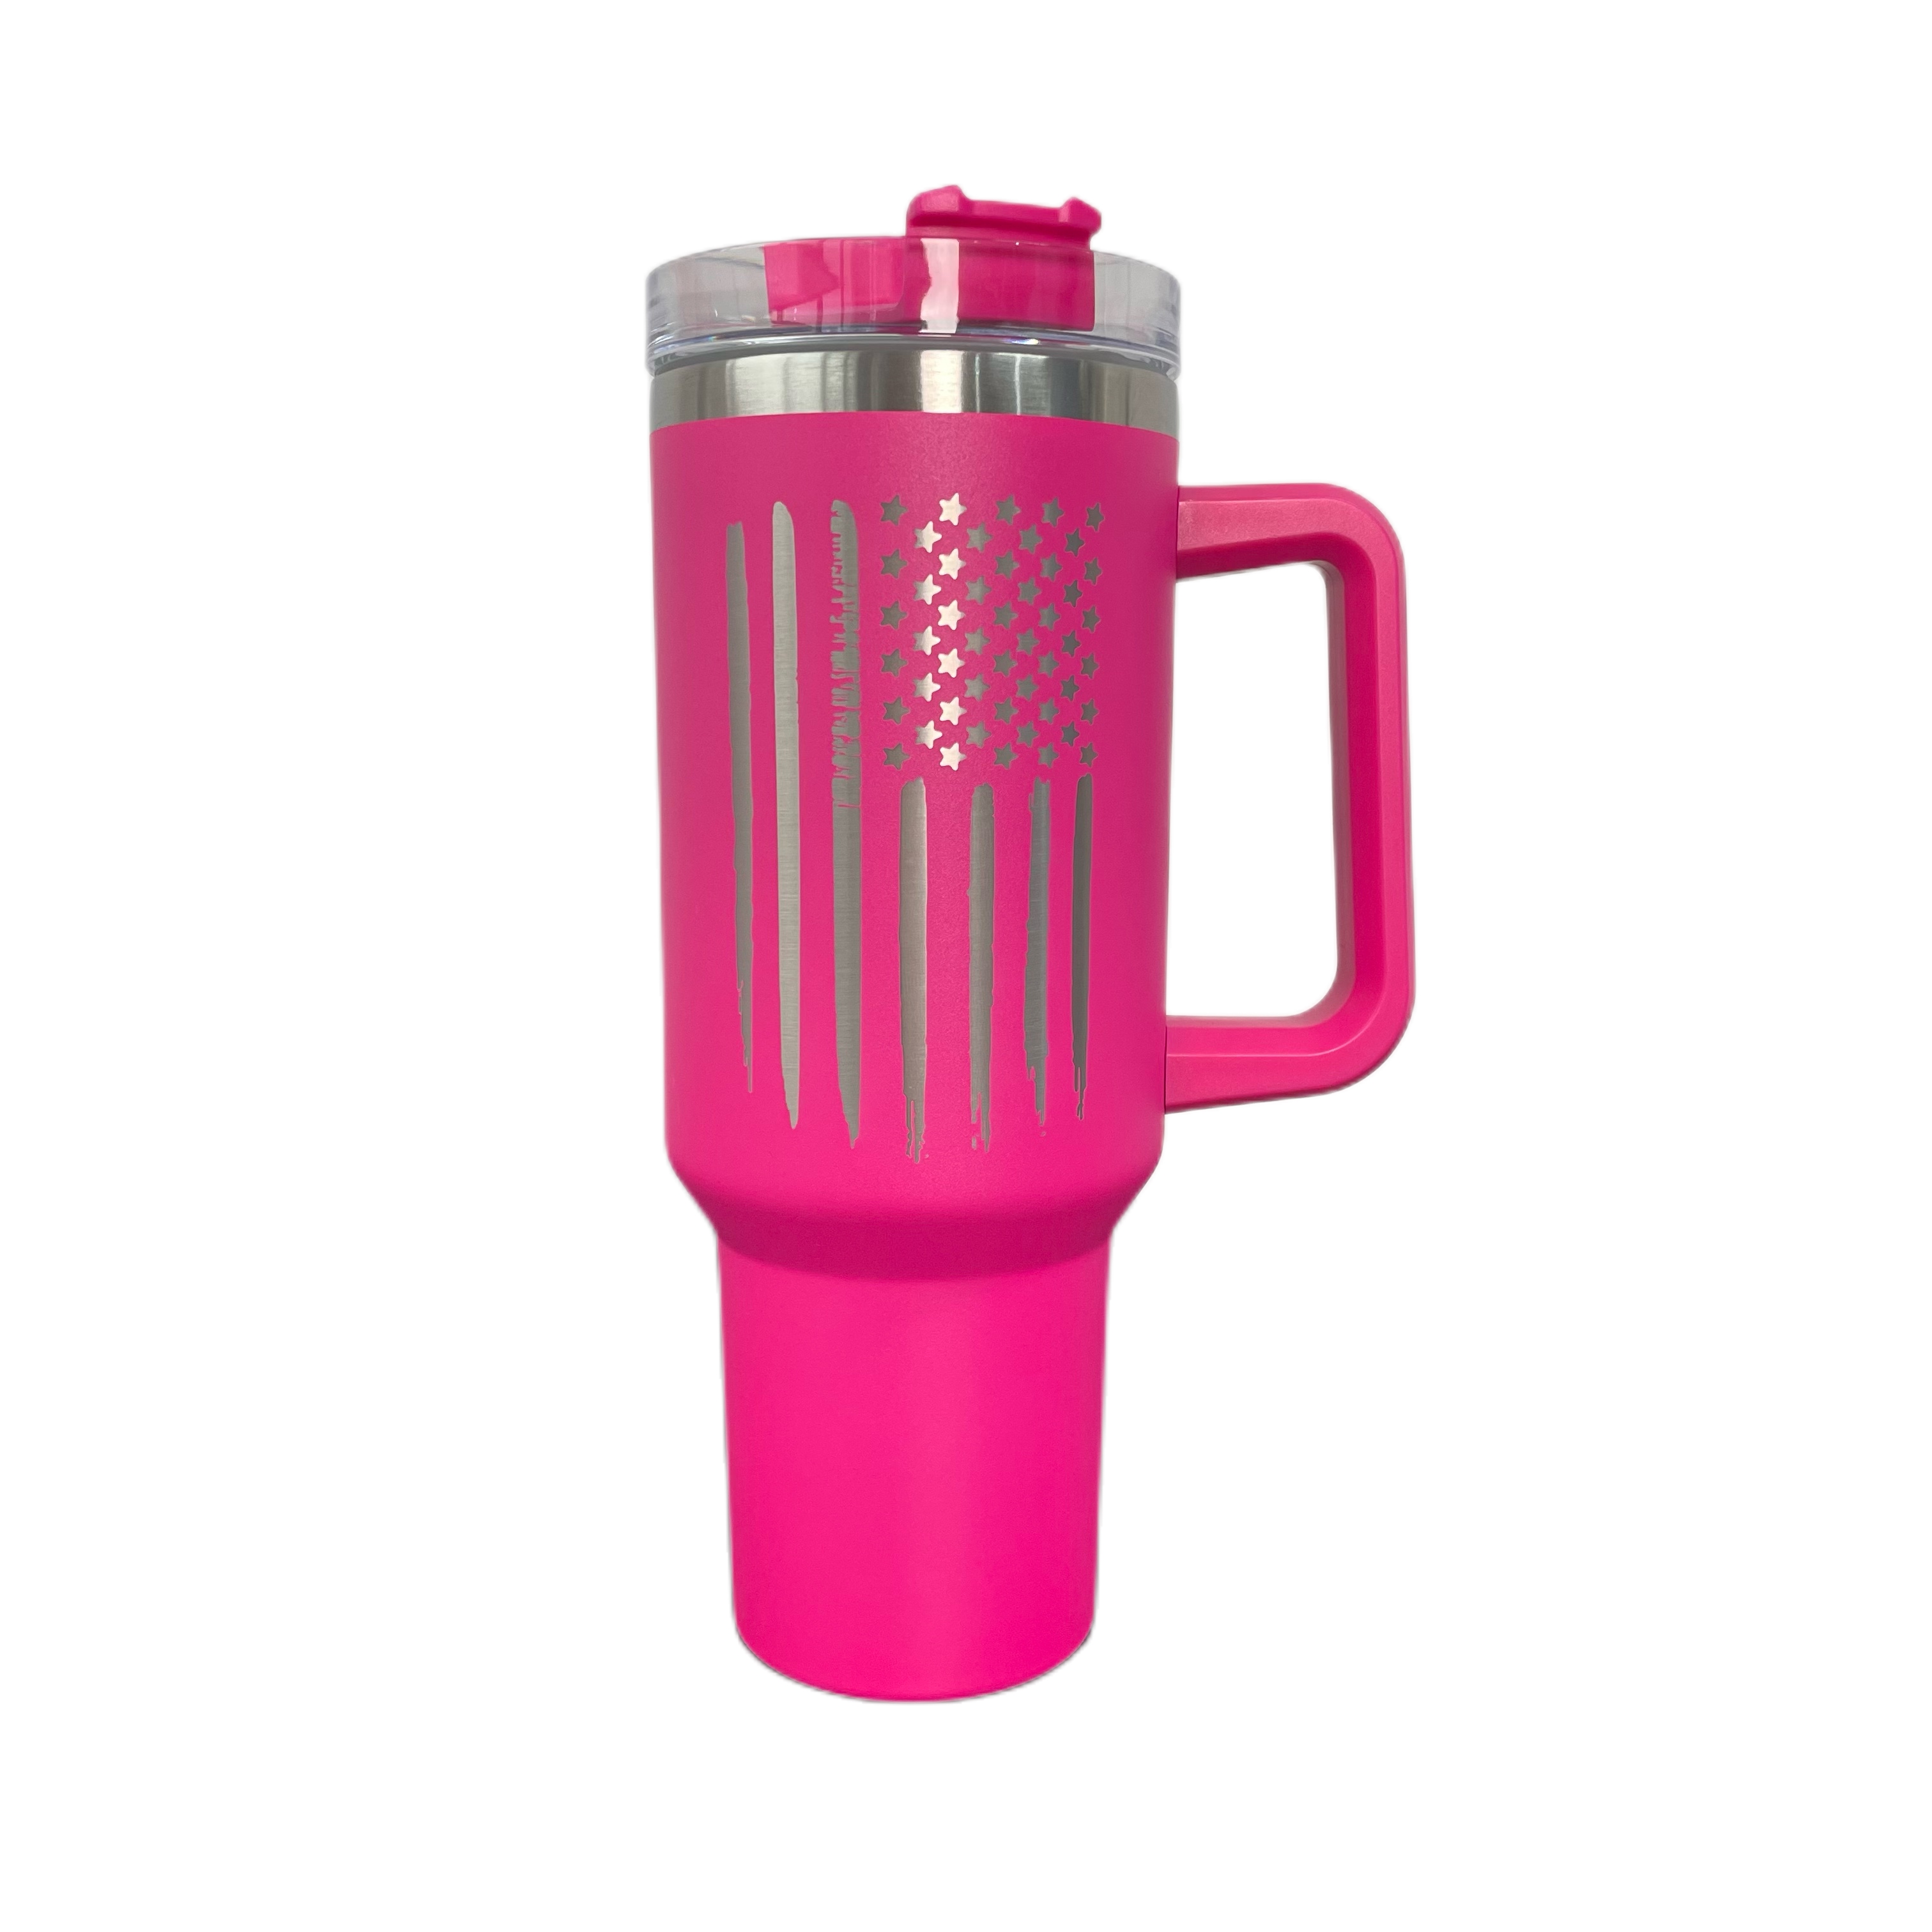 Handle Insulated Cup- Maroon (40oz)